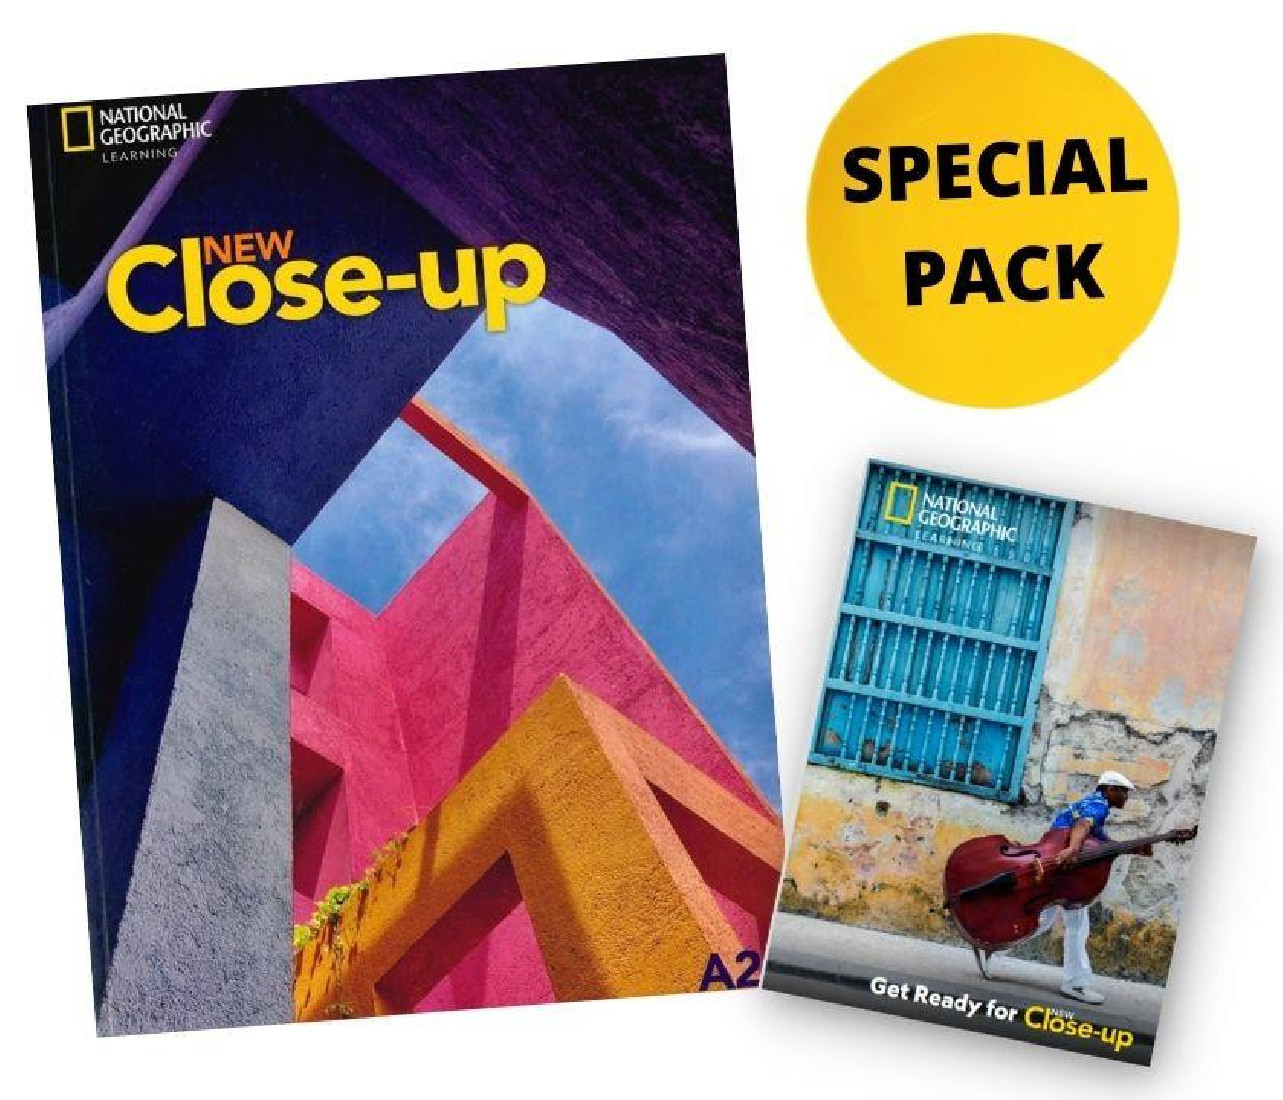 NEW CLOSE-UP A2 SB SPECIAL PACK (+ ONLINE PRACTICE + SB EBOOK)